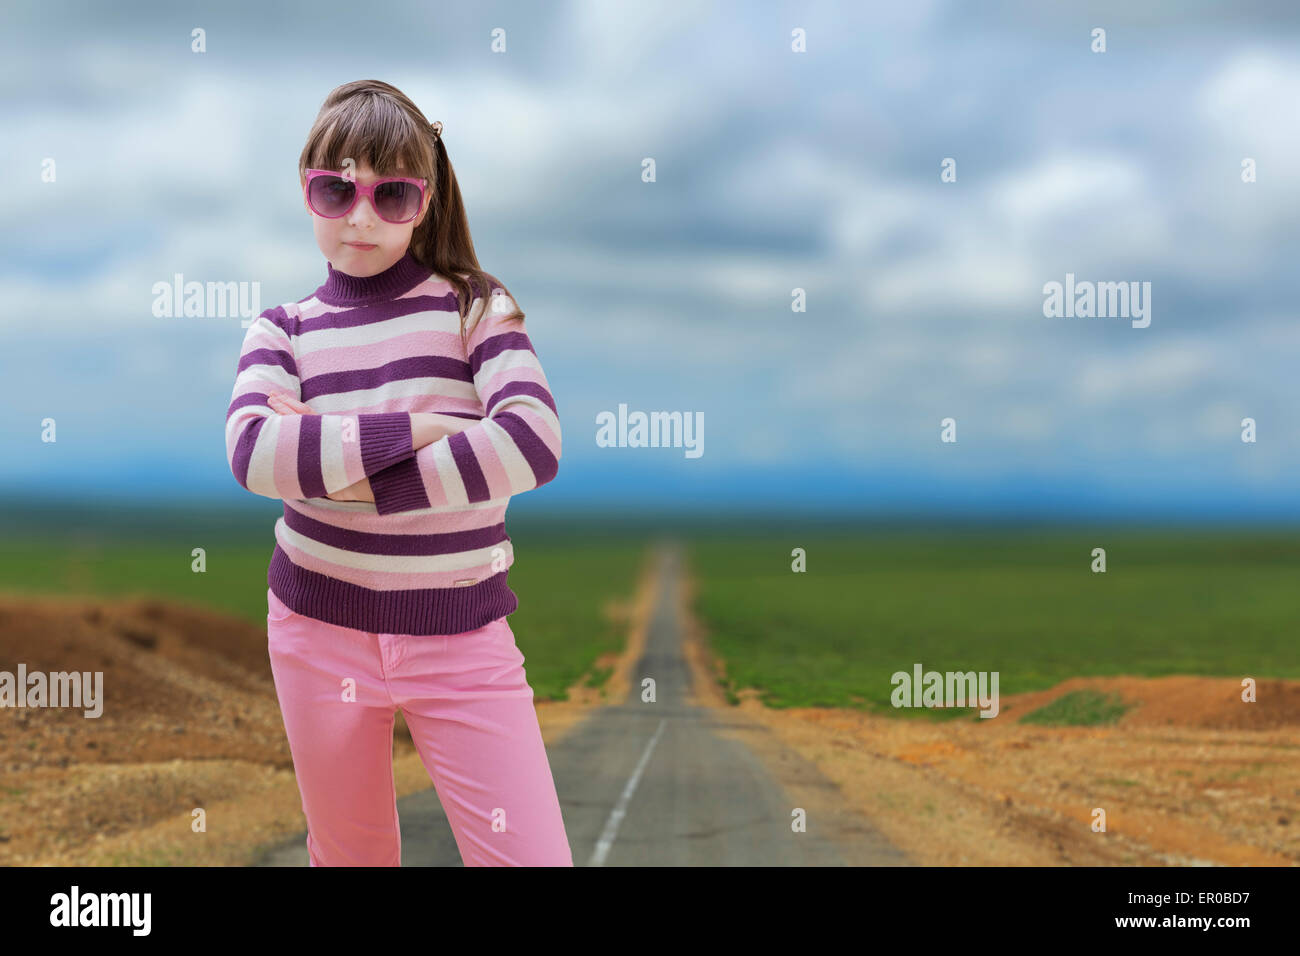 Teenage girl in pink wearing sunglasses with road in background Stock Photo